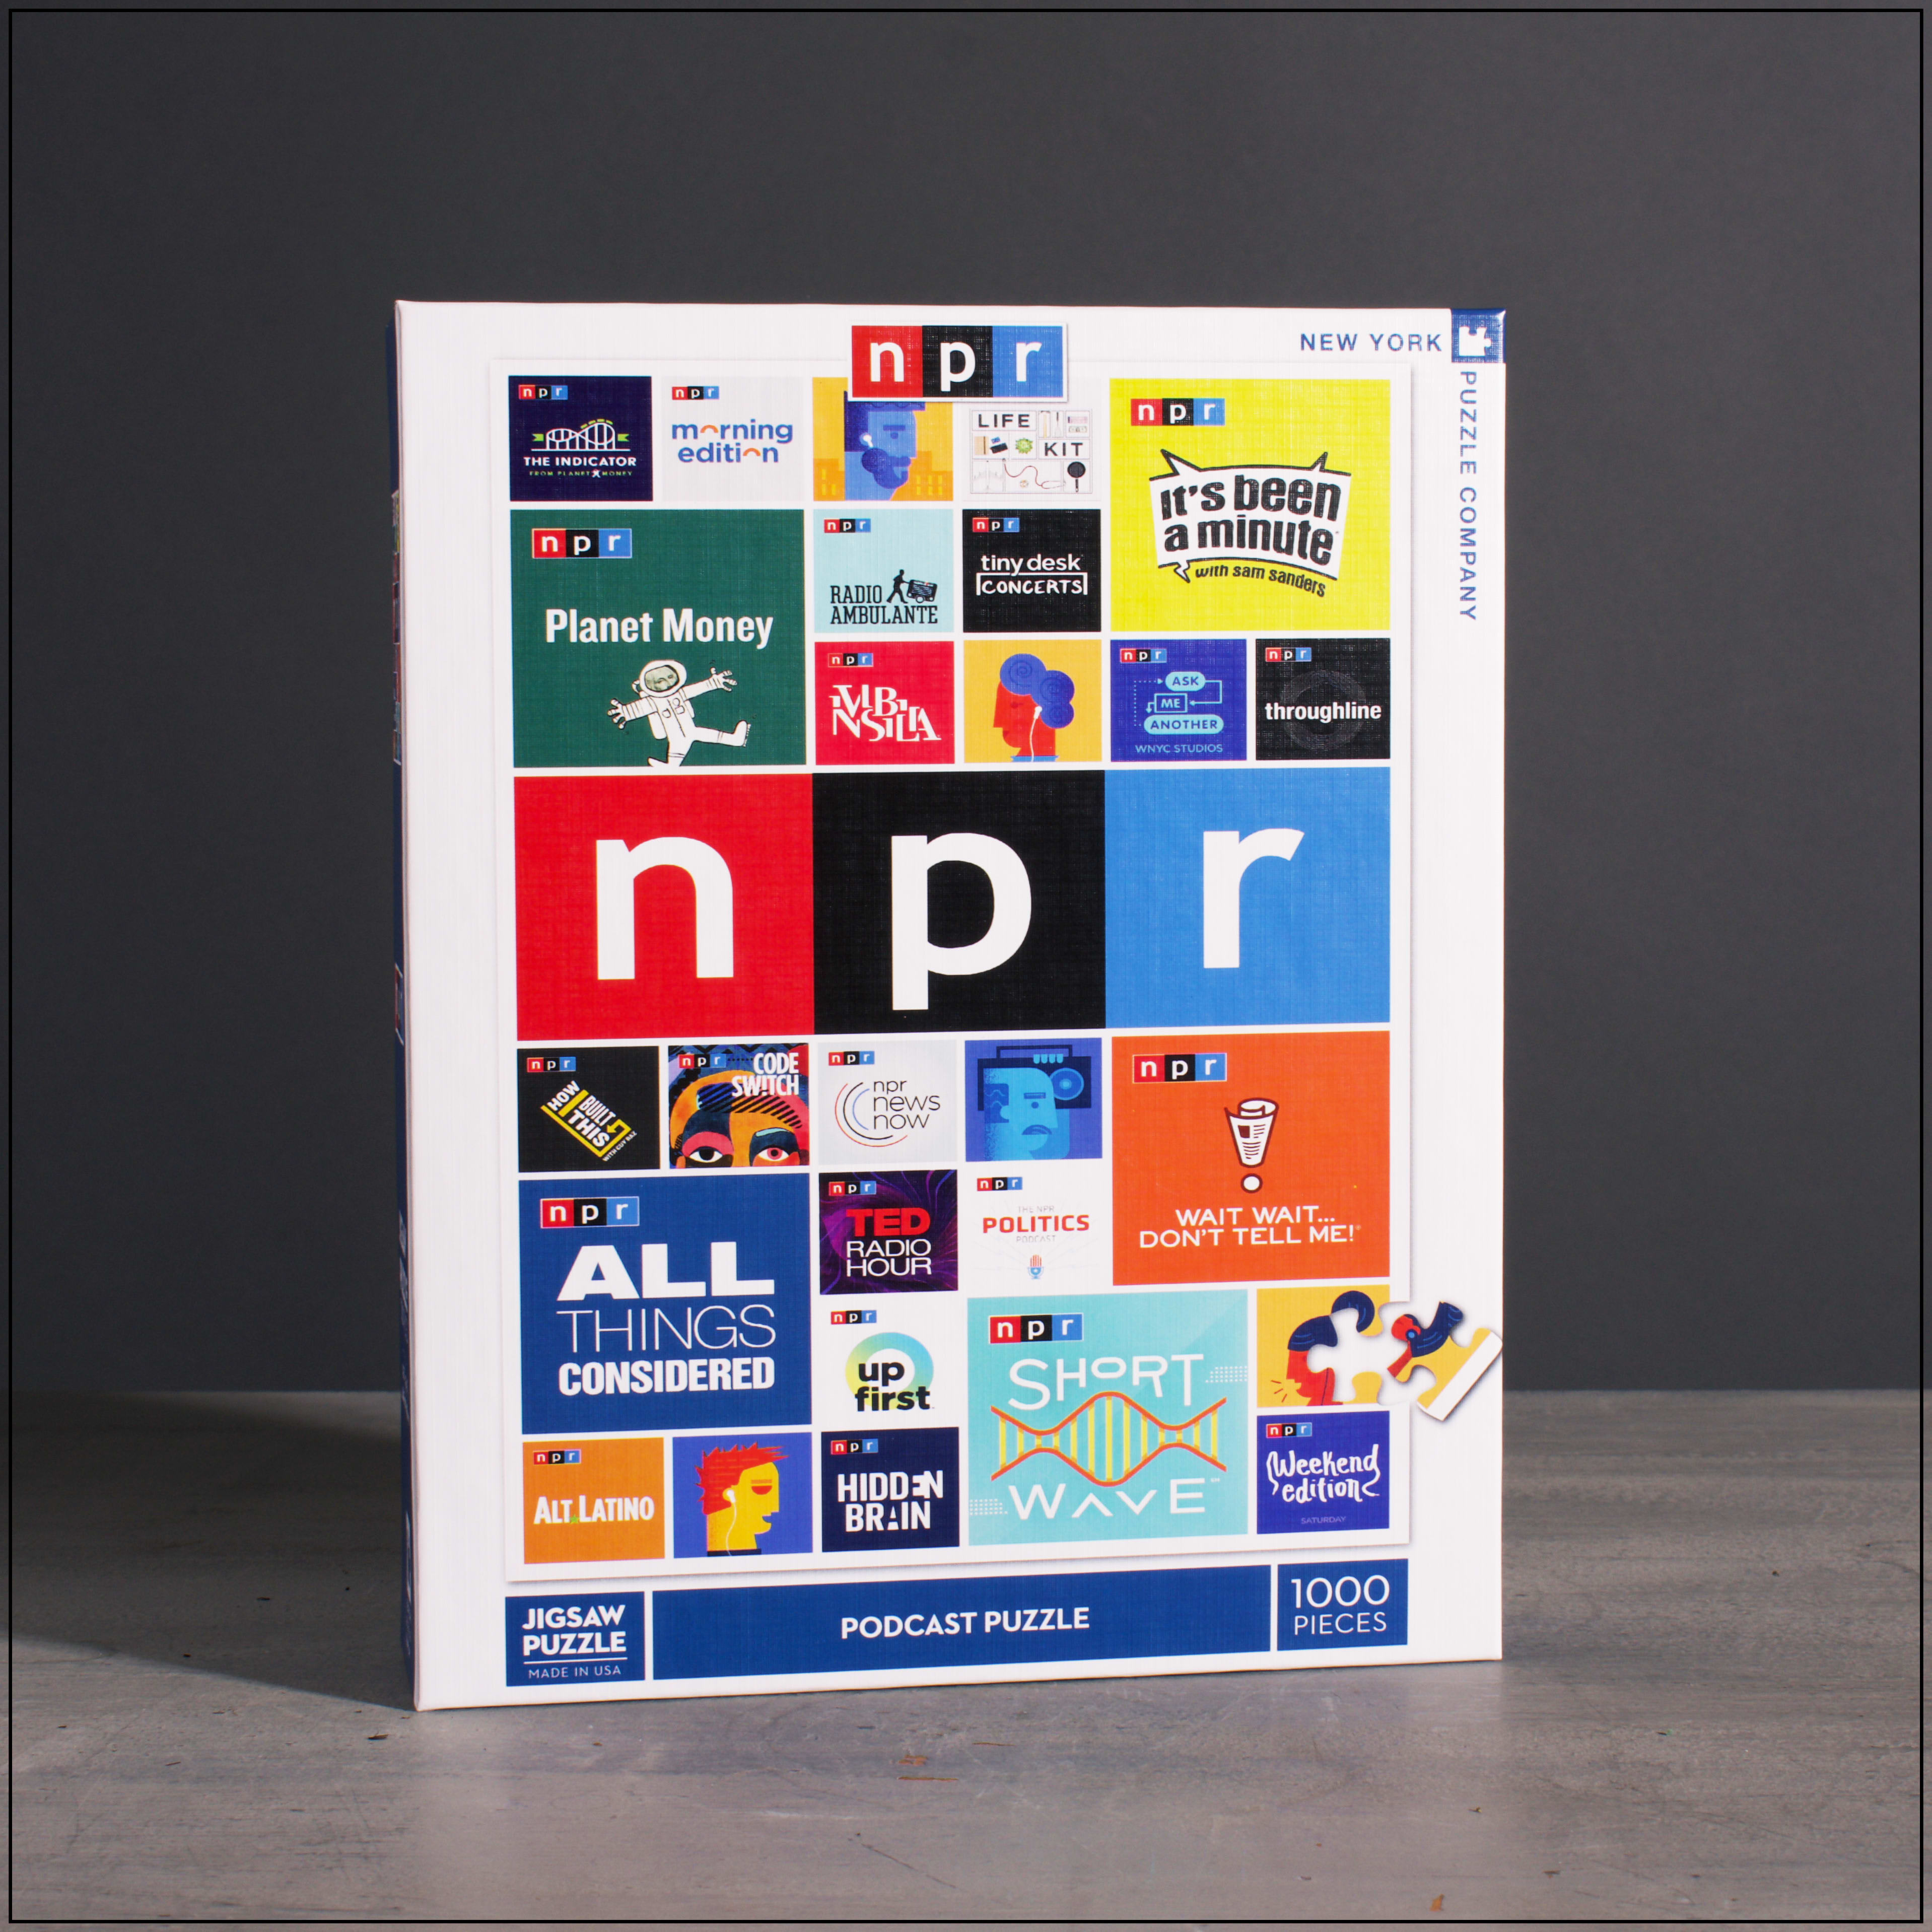 NPR Podcast Puzzle in Kansas City, MO Fiddly Fig